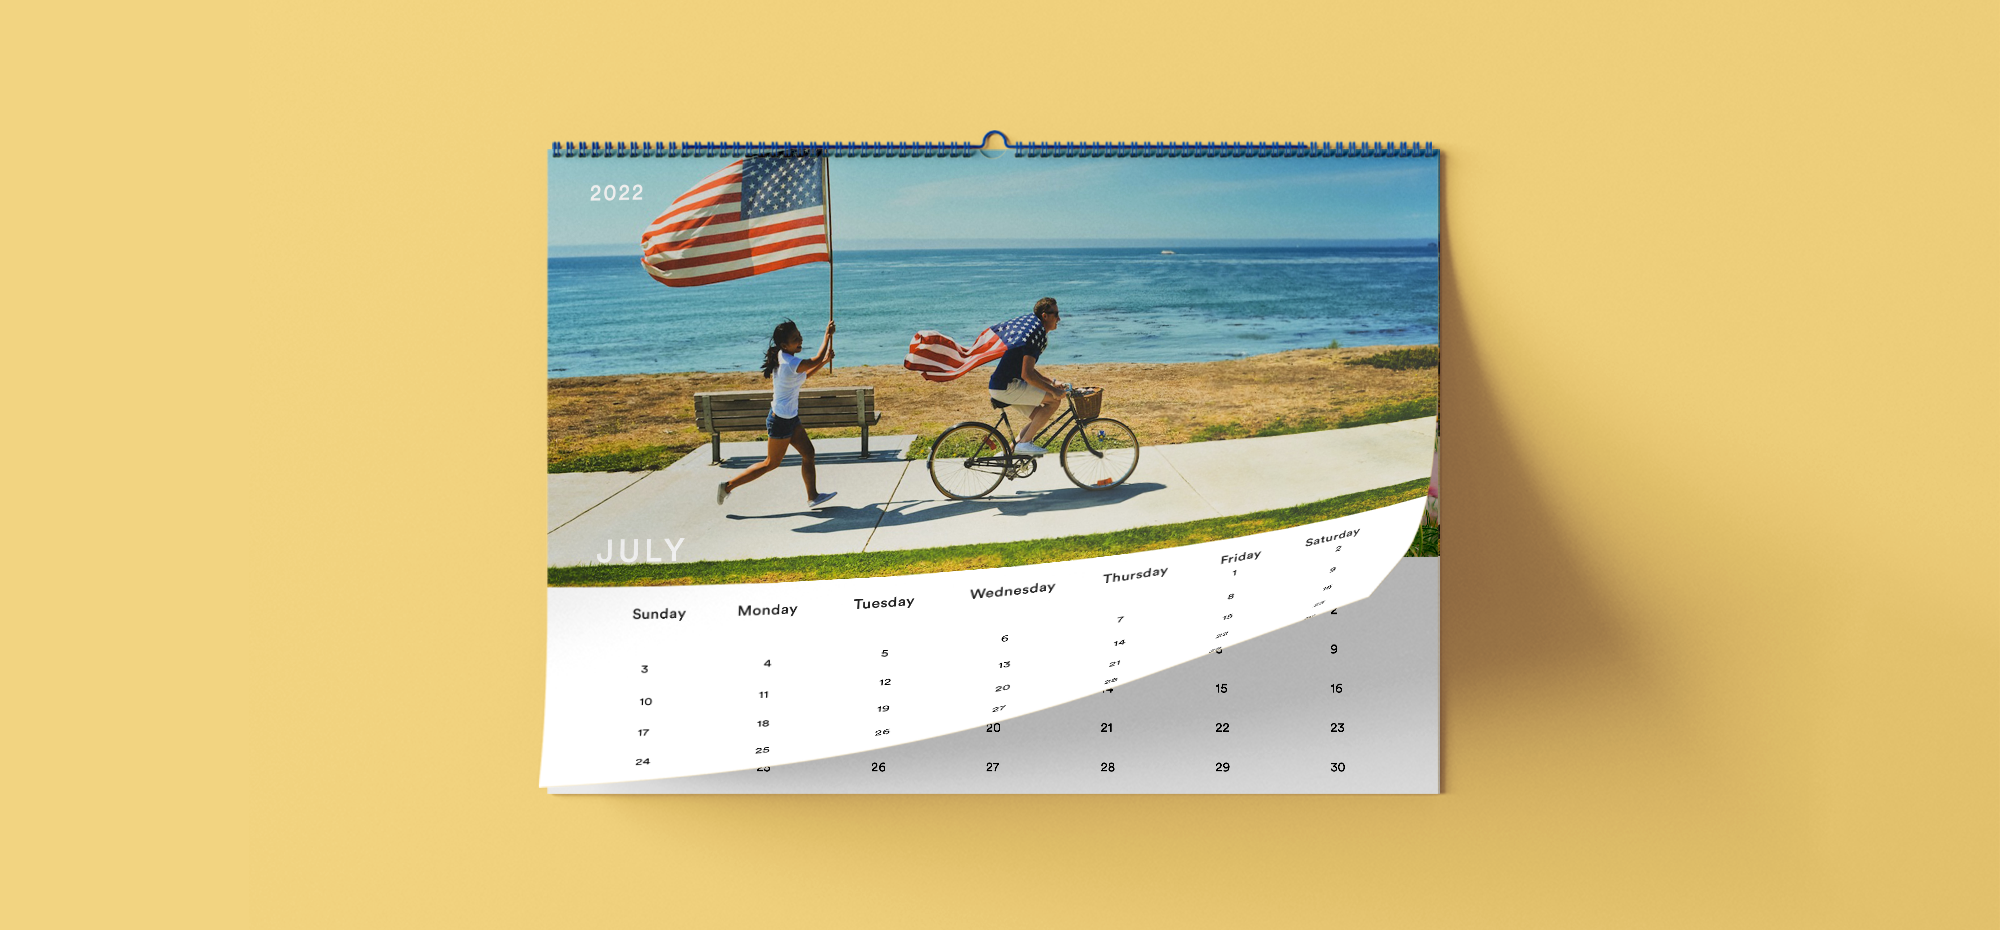 Looking for Inspiration? Our Q3 Shopping Calendar Can Help!